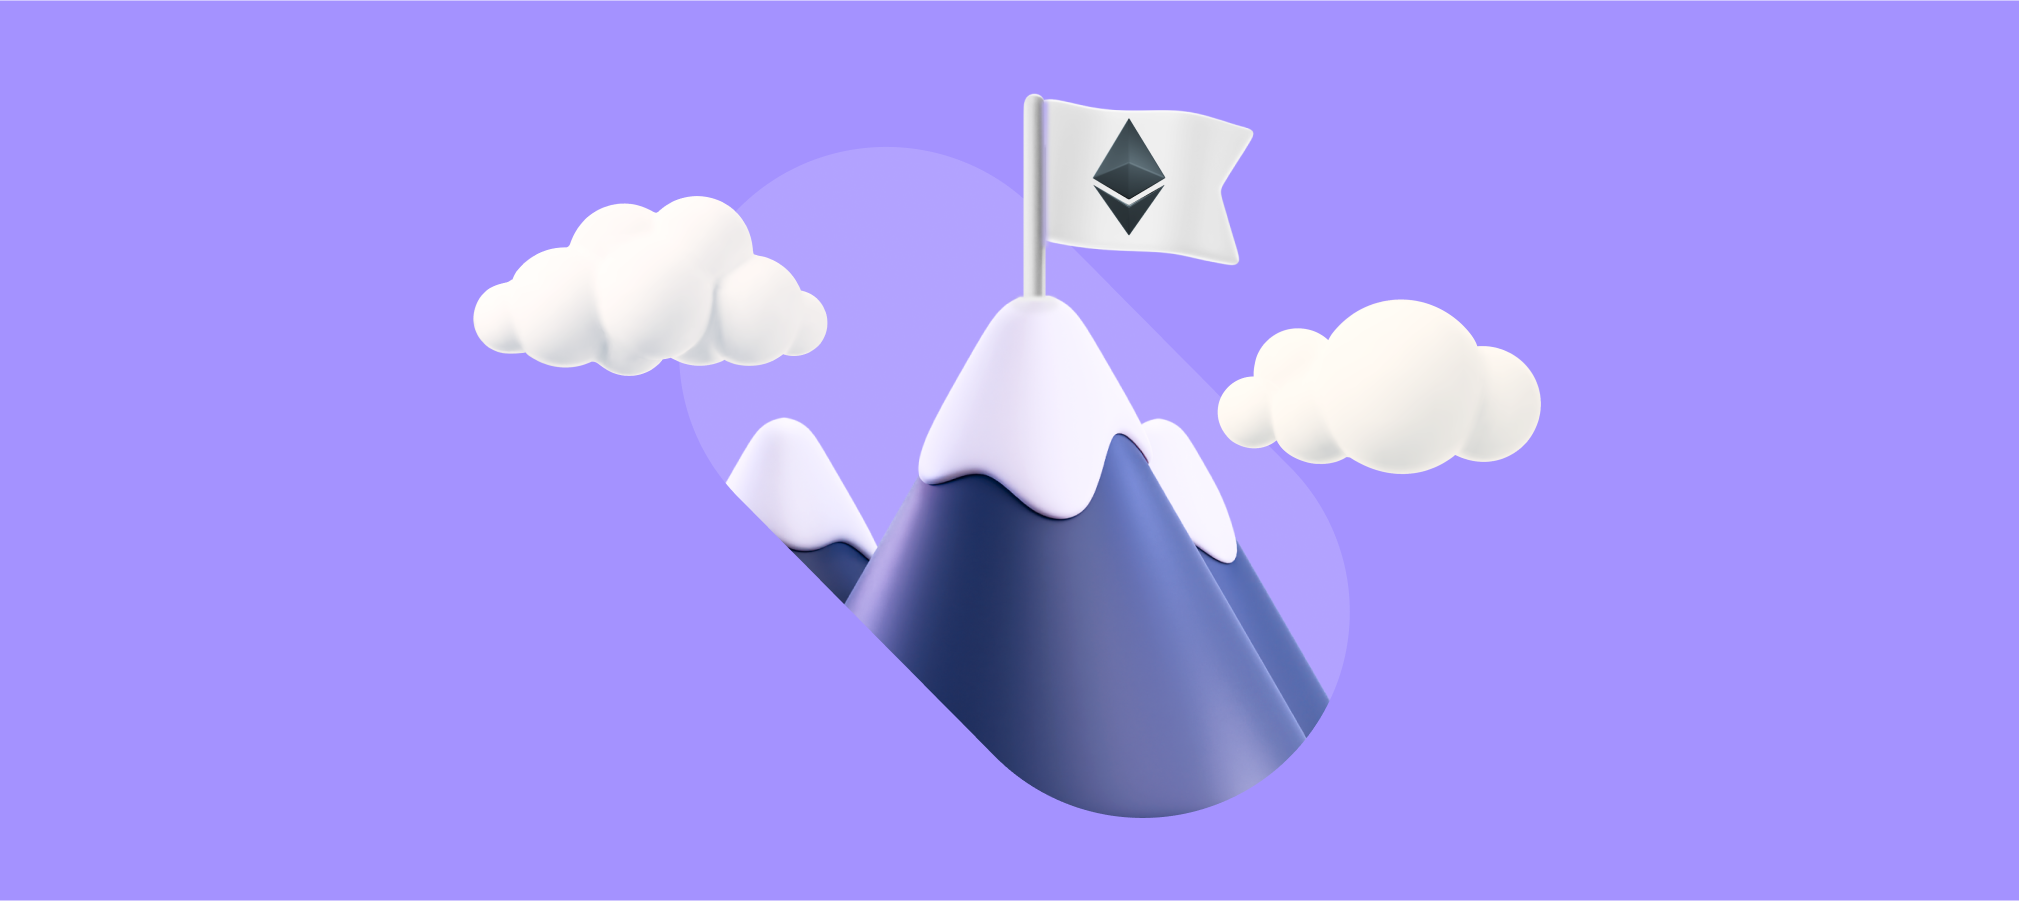    Top Ethereum Projects 2022